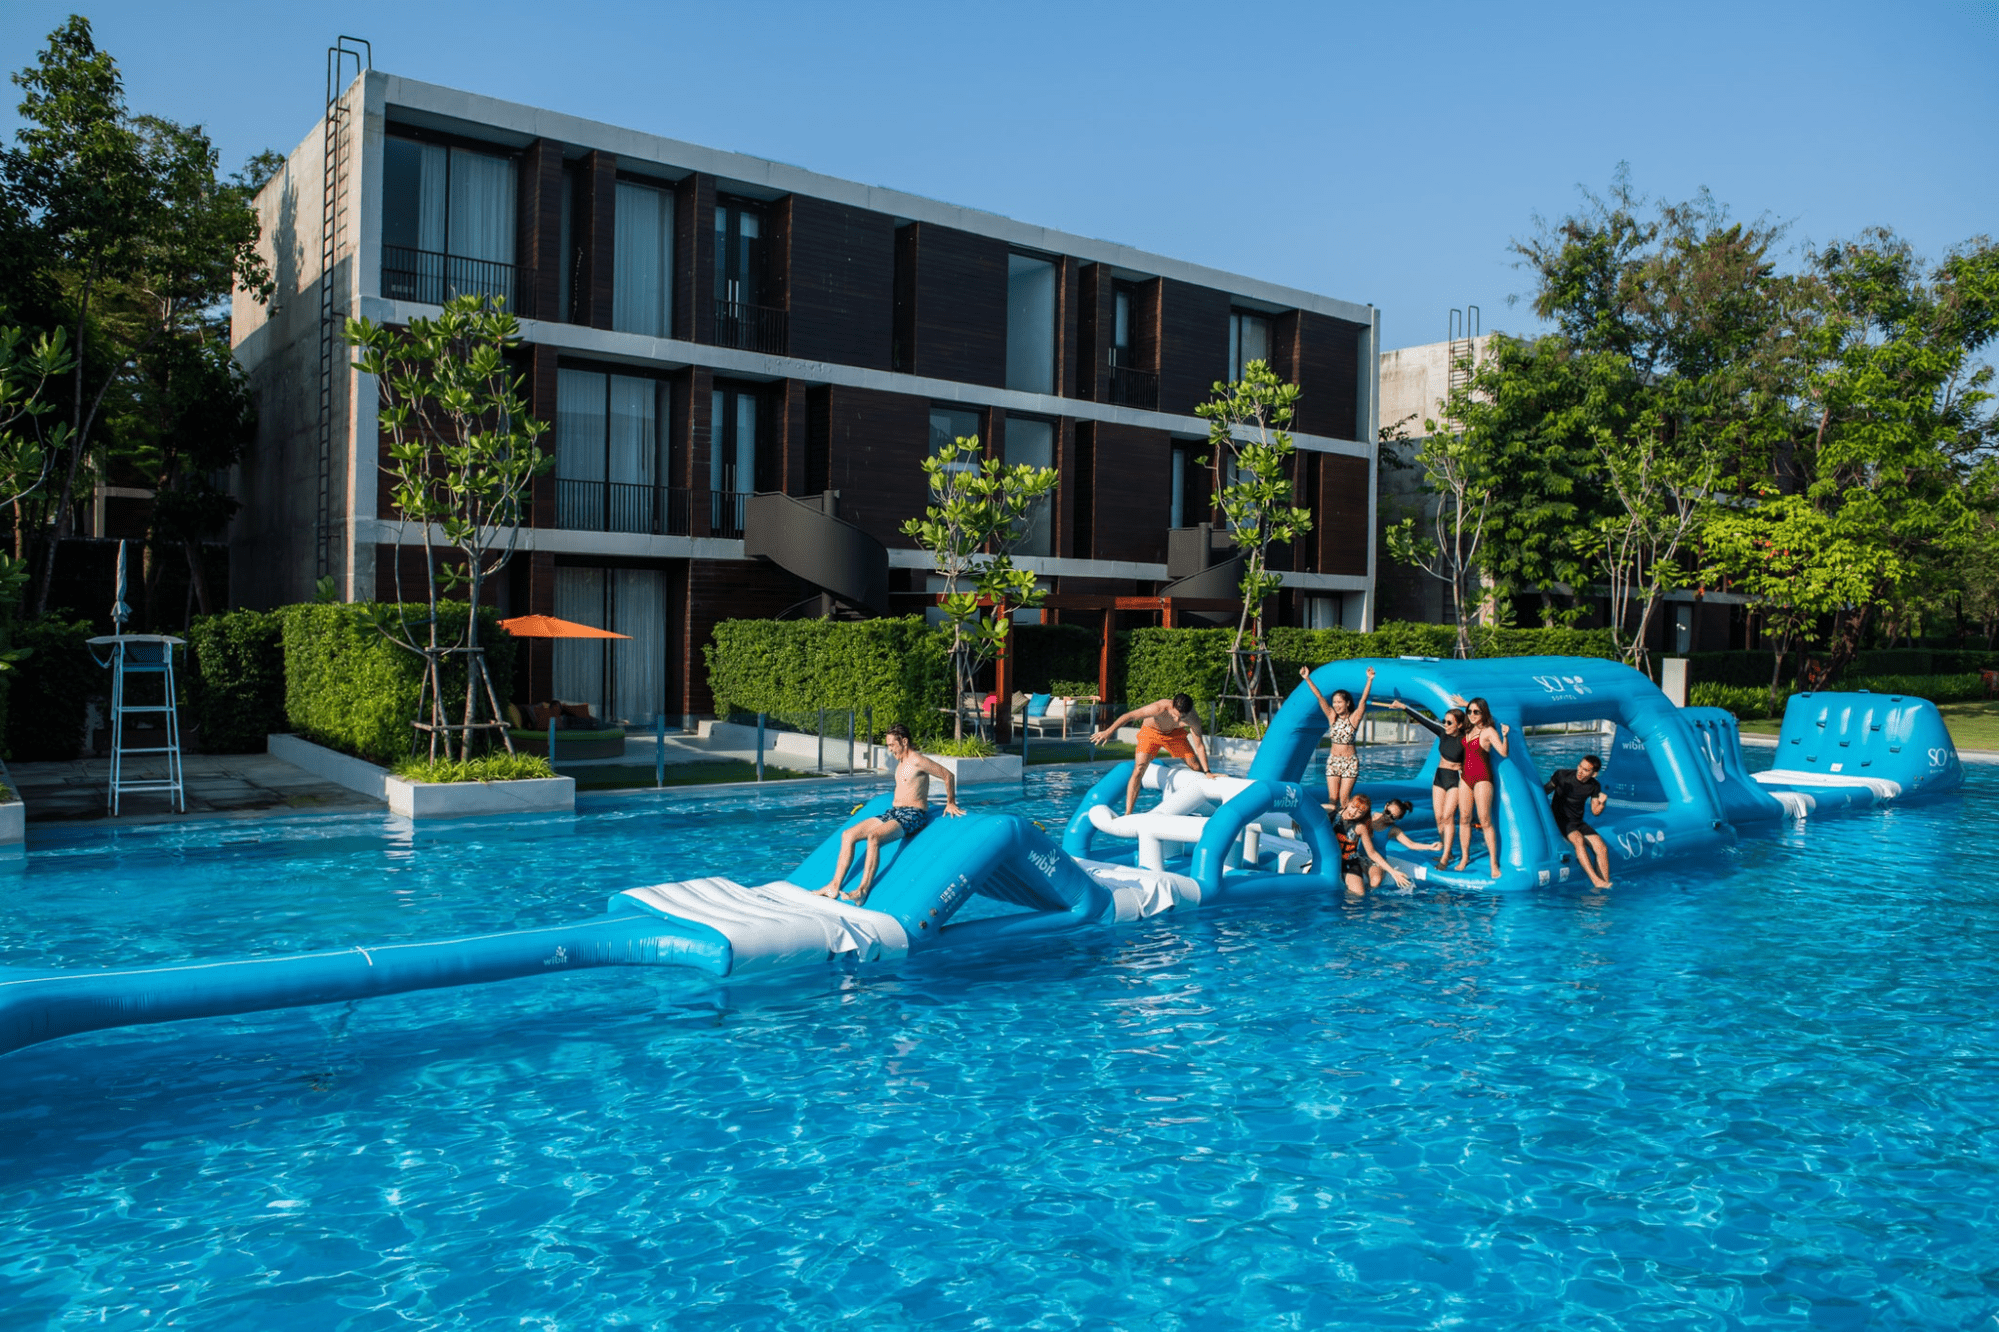 Hotels with Kids Clubs - inflatable floating playground